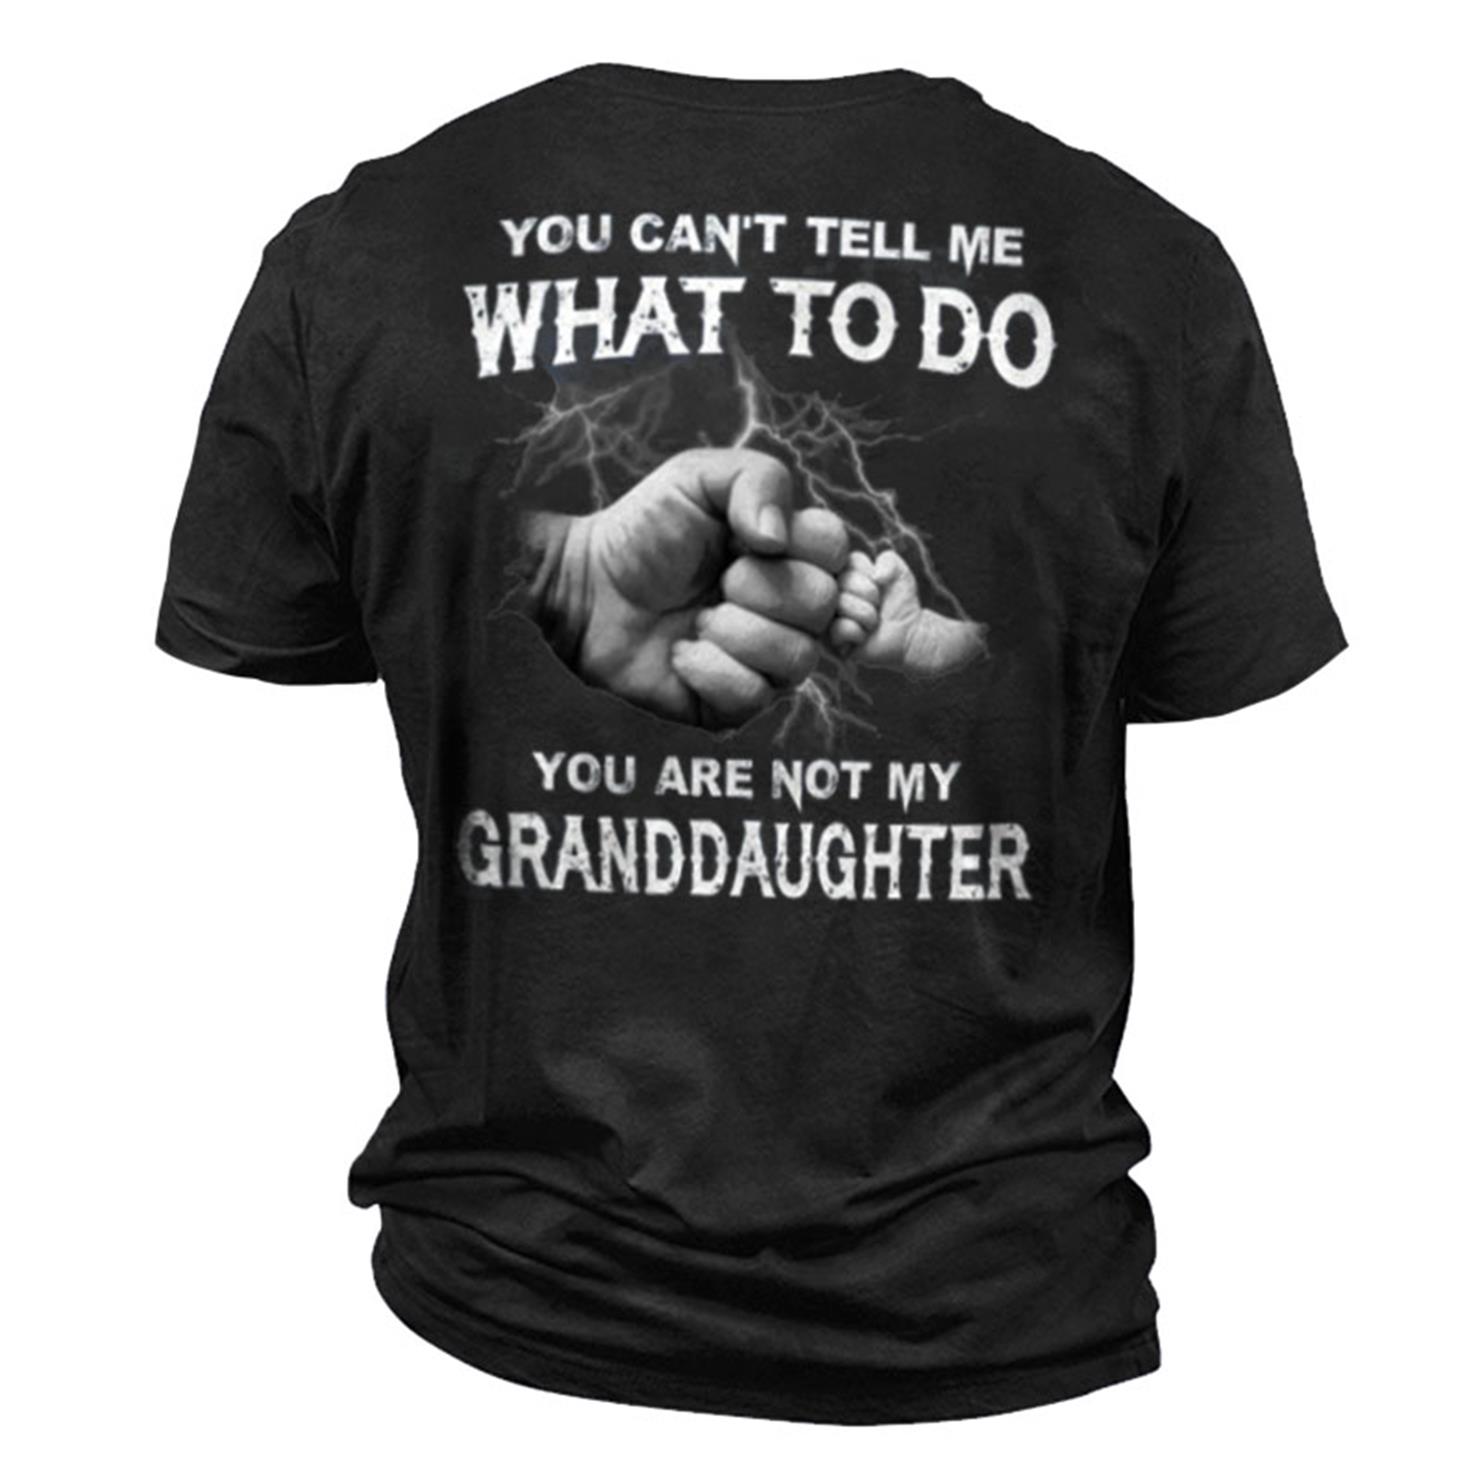 Men's You Can't Tell Chic Me What To Do You Are Not My Granddaughter Cotton T-shirt